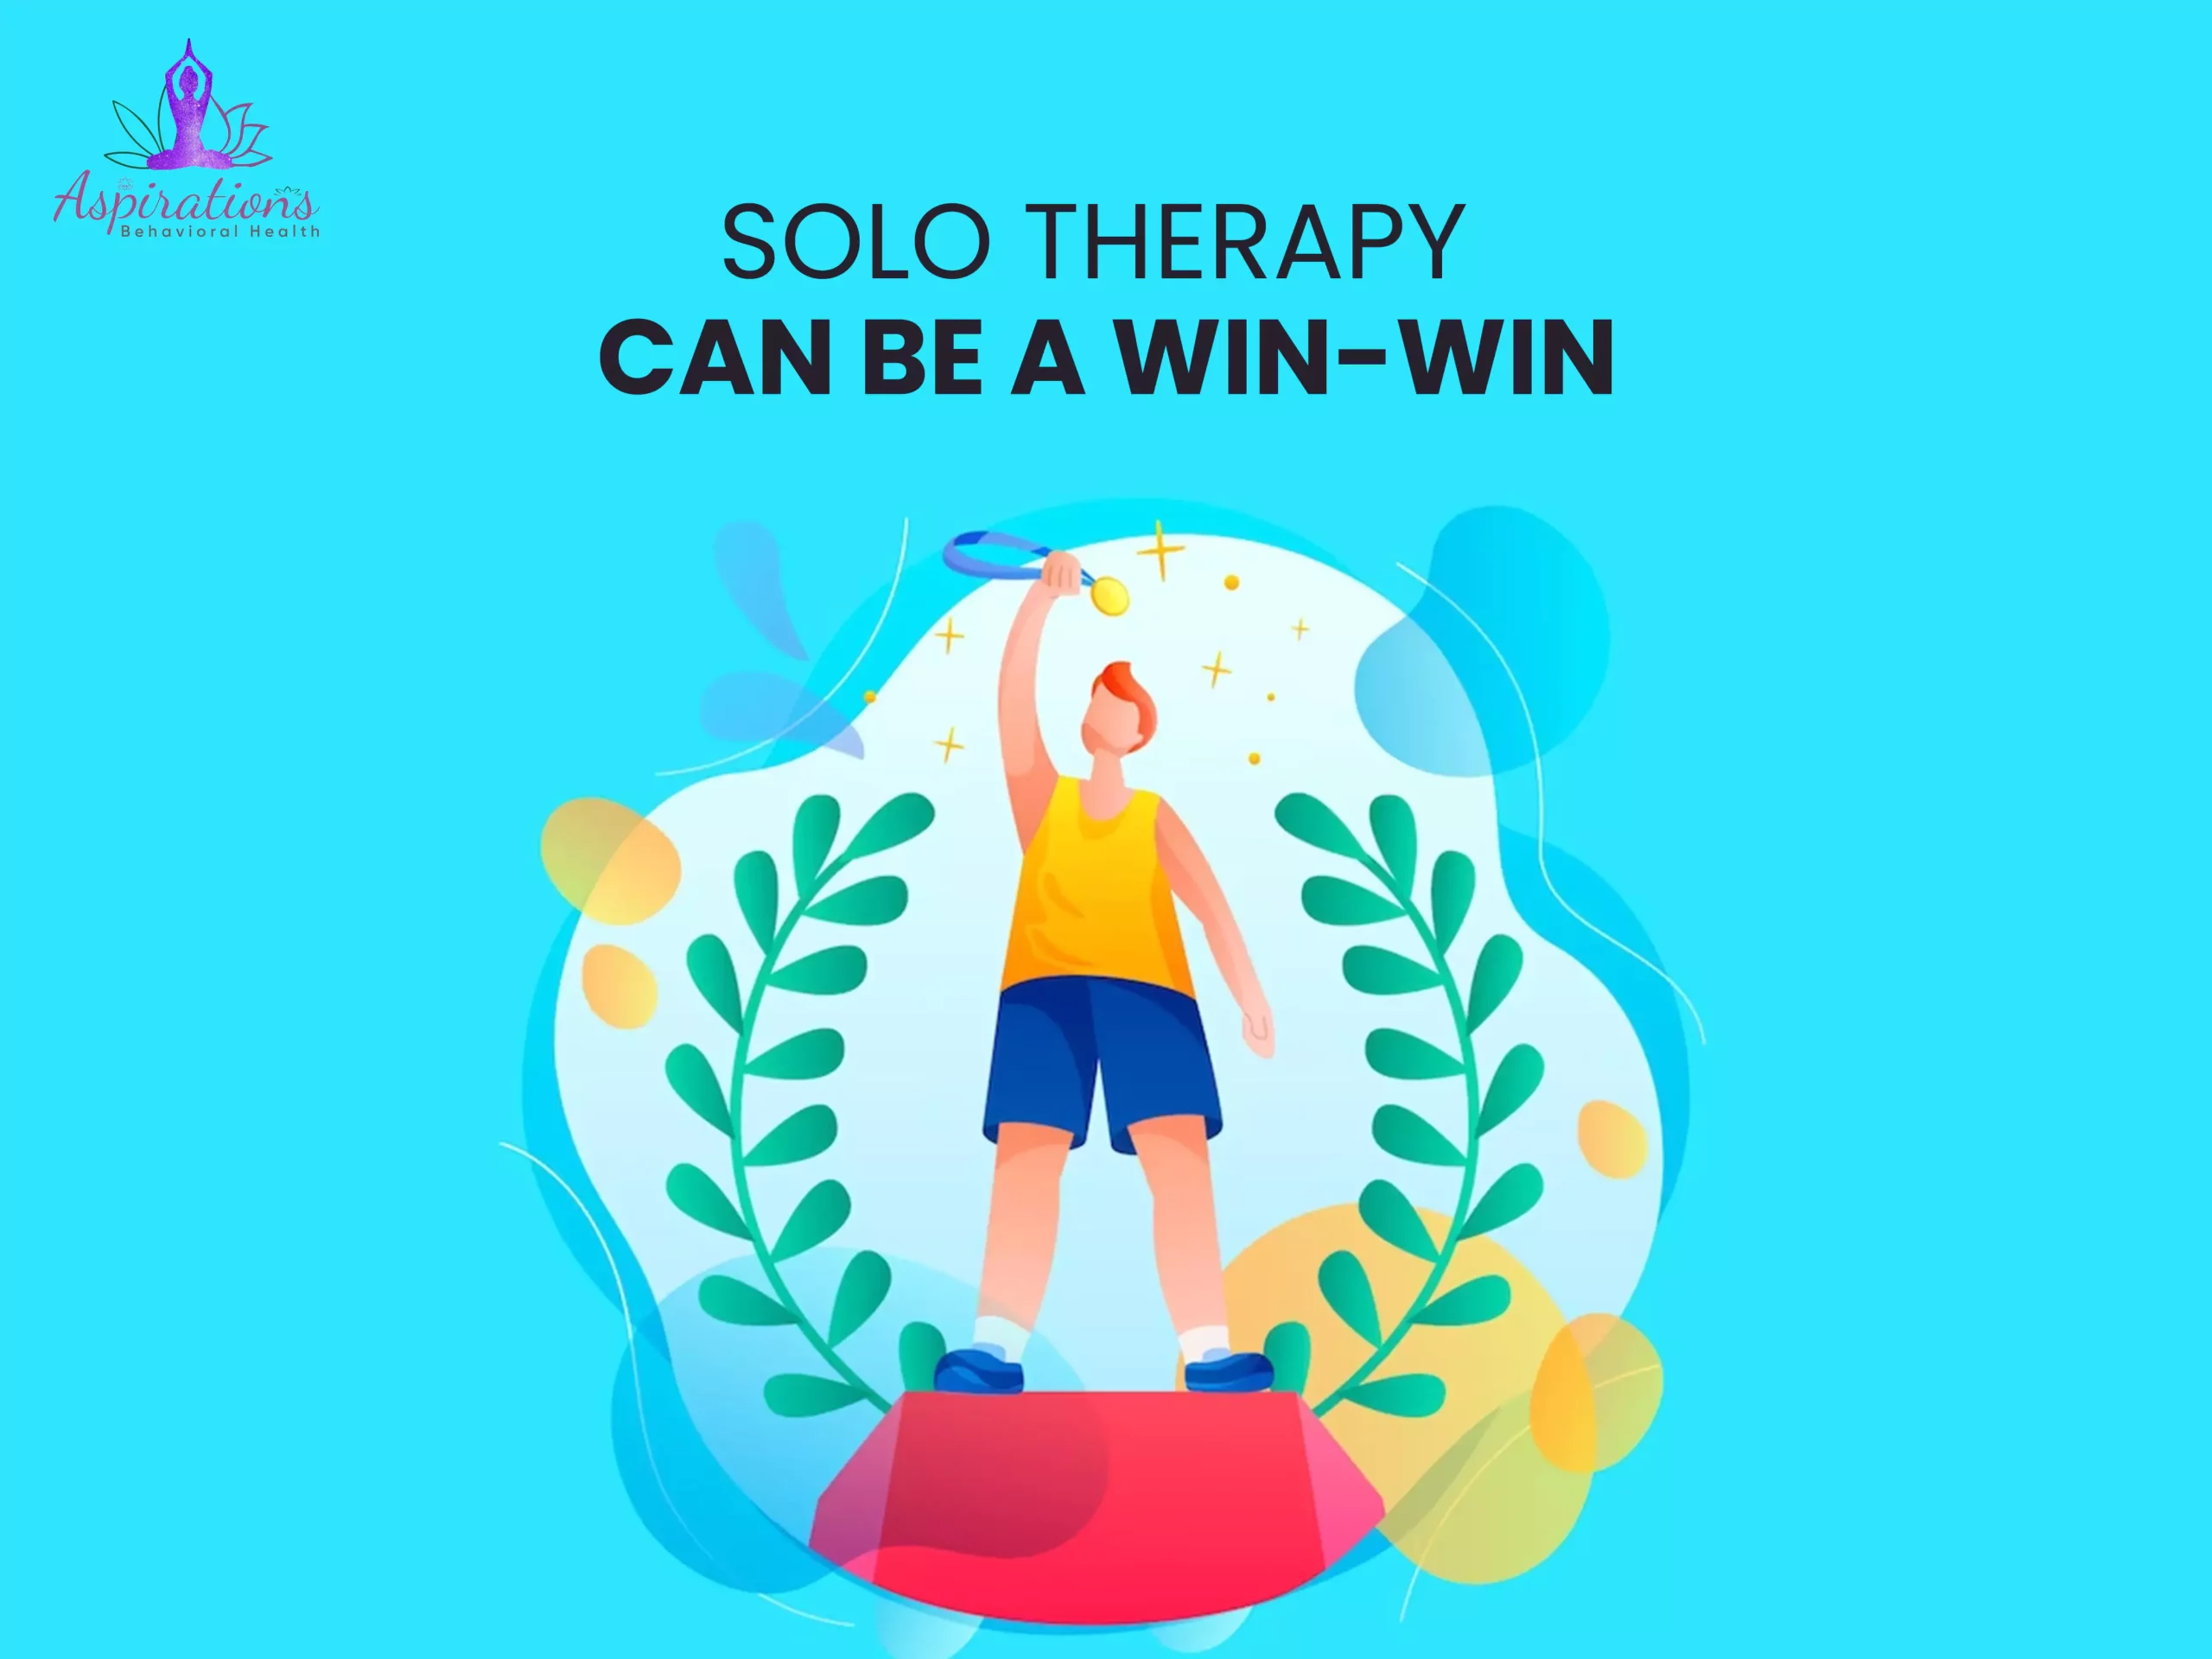 Solo Therapy Can Be a Win-Win